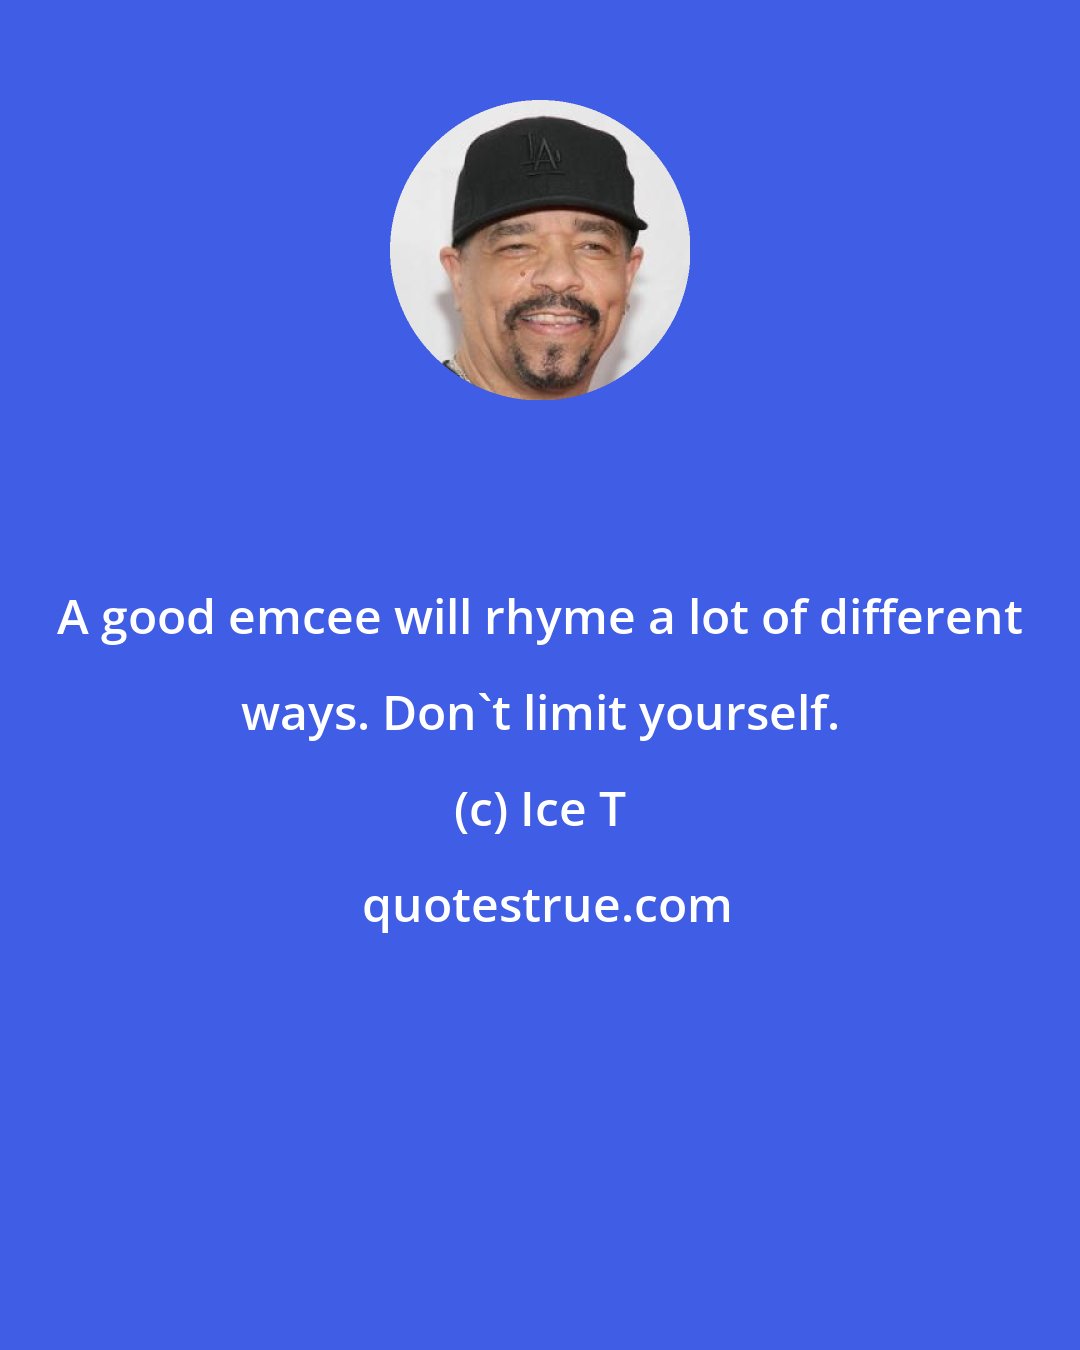 Ice T: A good emcee will rhyme a lot of different ways. Don't limit yourself.